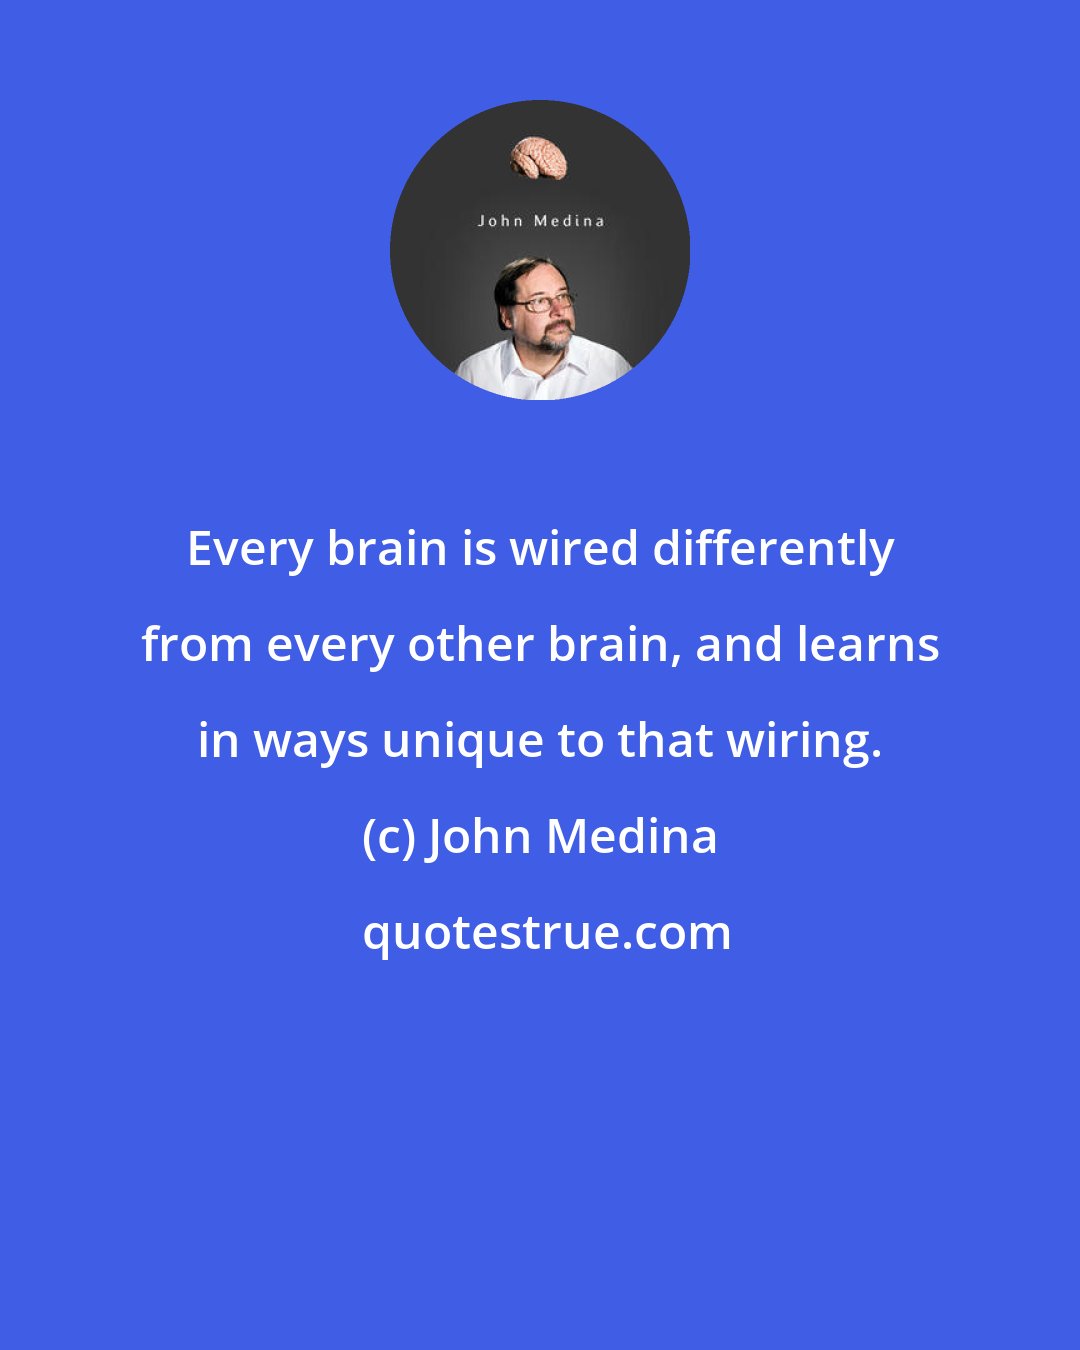 John Medina: Every brain is wired differently from every other brain, and learns in ways unique to that wiring.